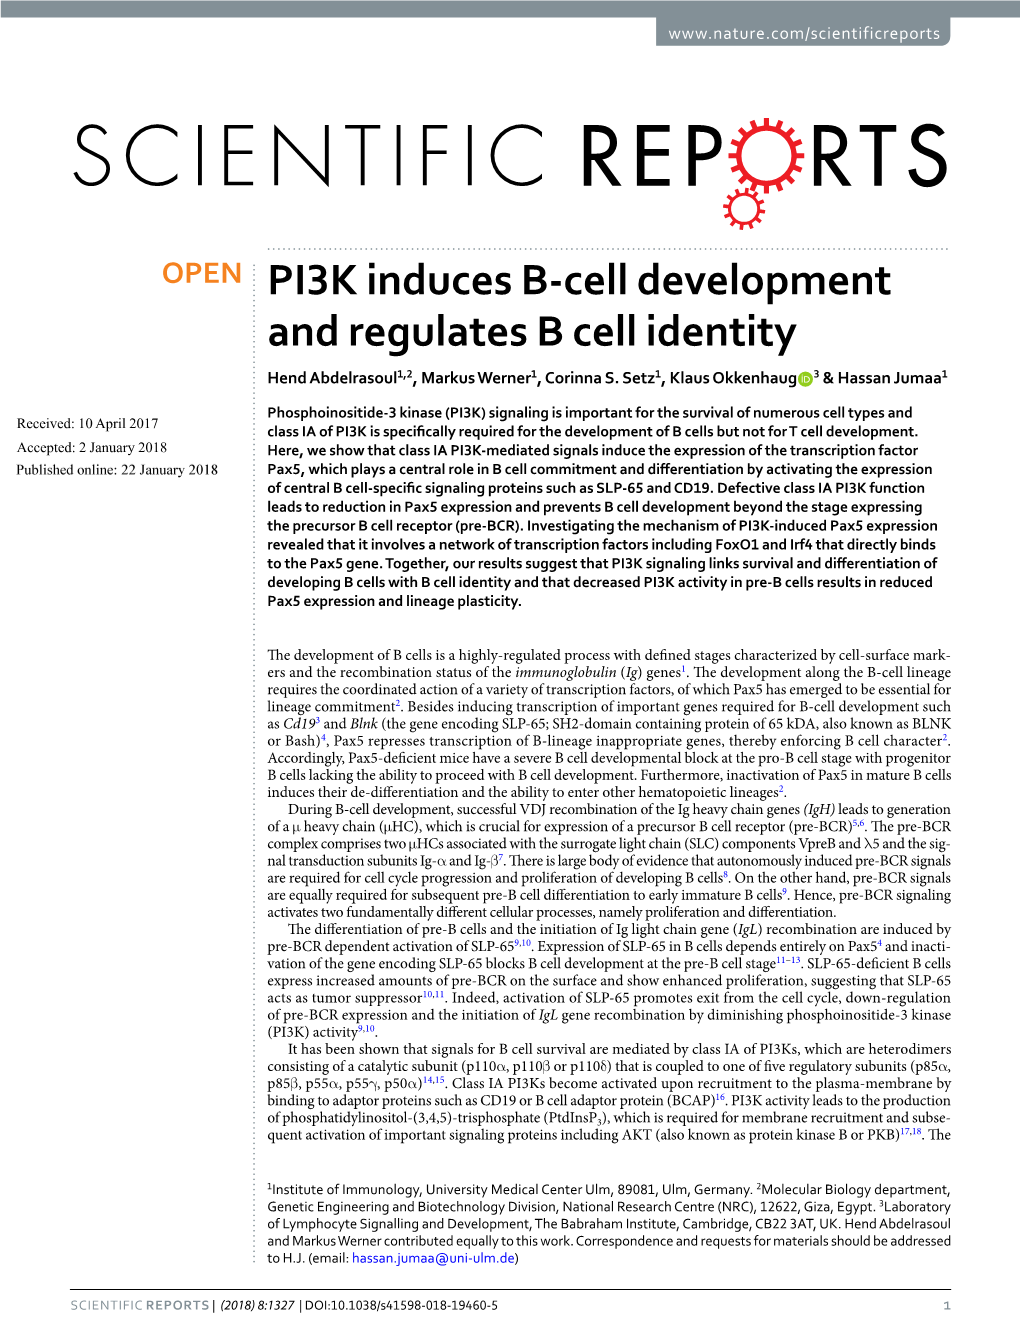 PI3K Induces B-Cell Development and Regulates B Cell Identity Hend Abdelrasoul1,2, Markus Werner1, Corinna S